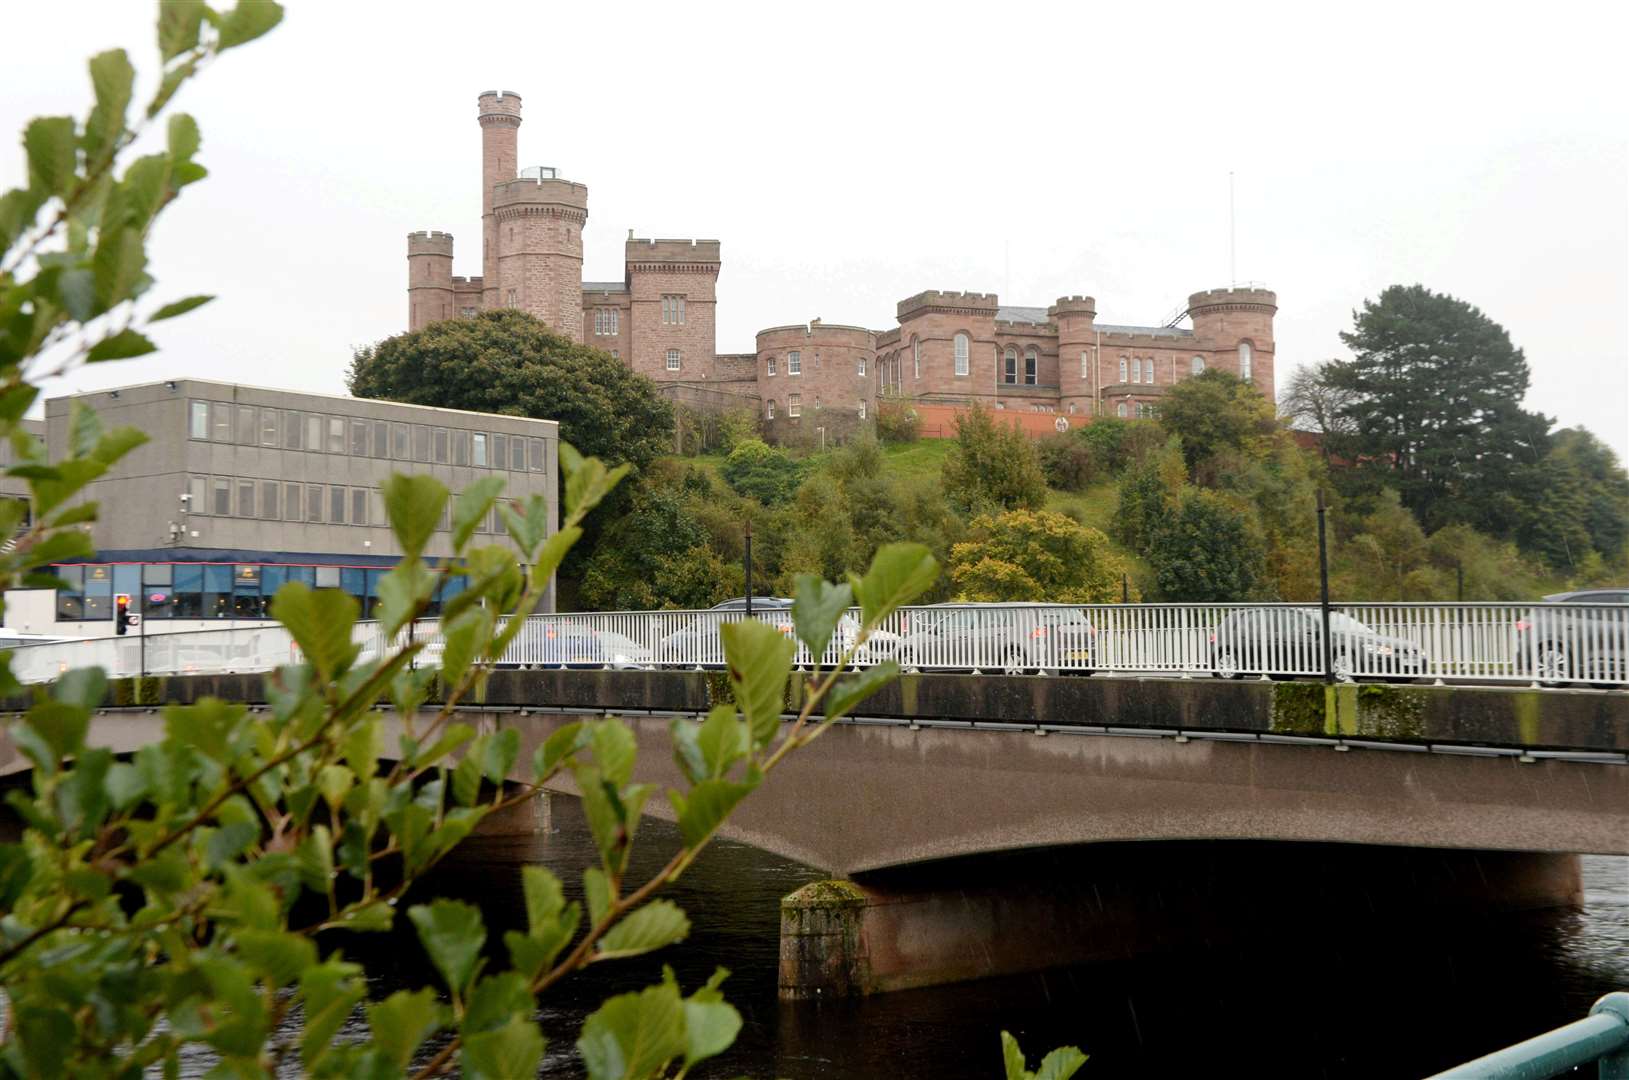 Inverness Castle is among the major redevelopments currently under way in the city.